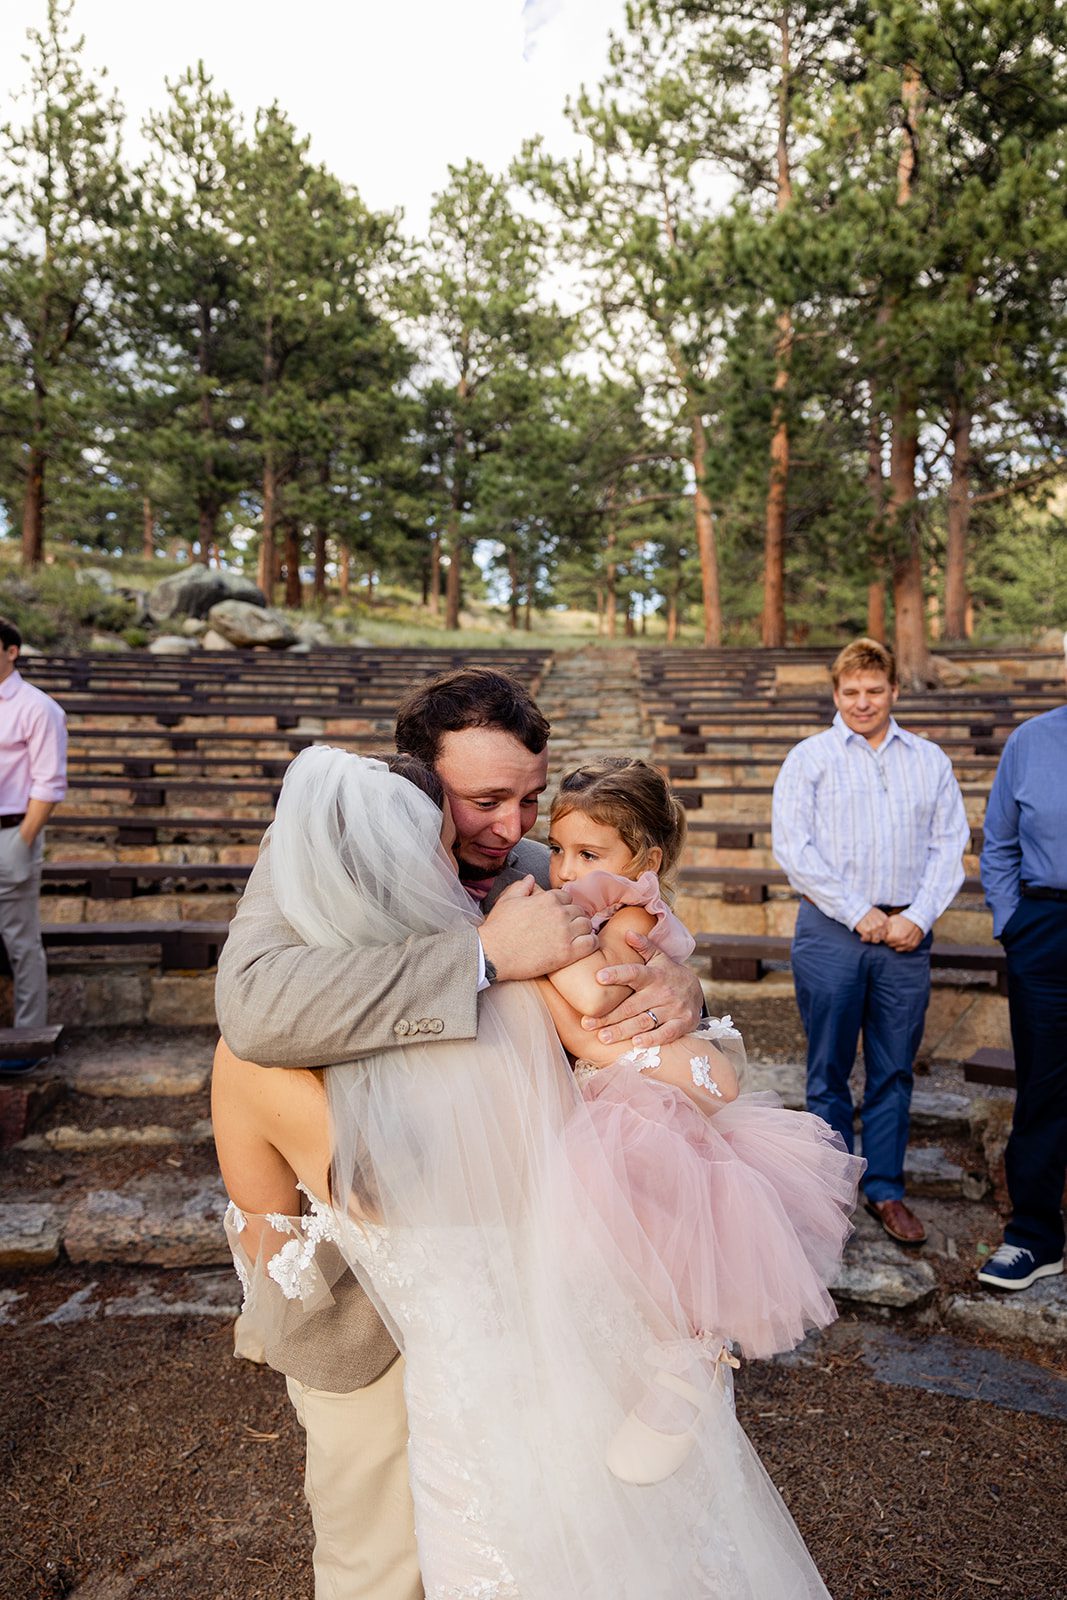 The bride and groom embrace their young daughter after their ceremony. 